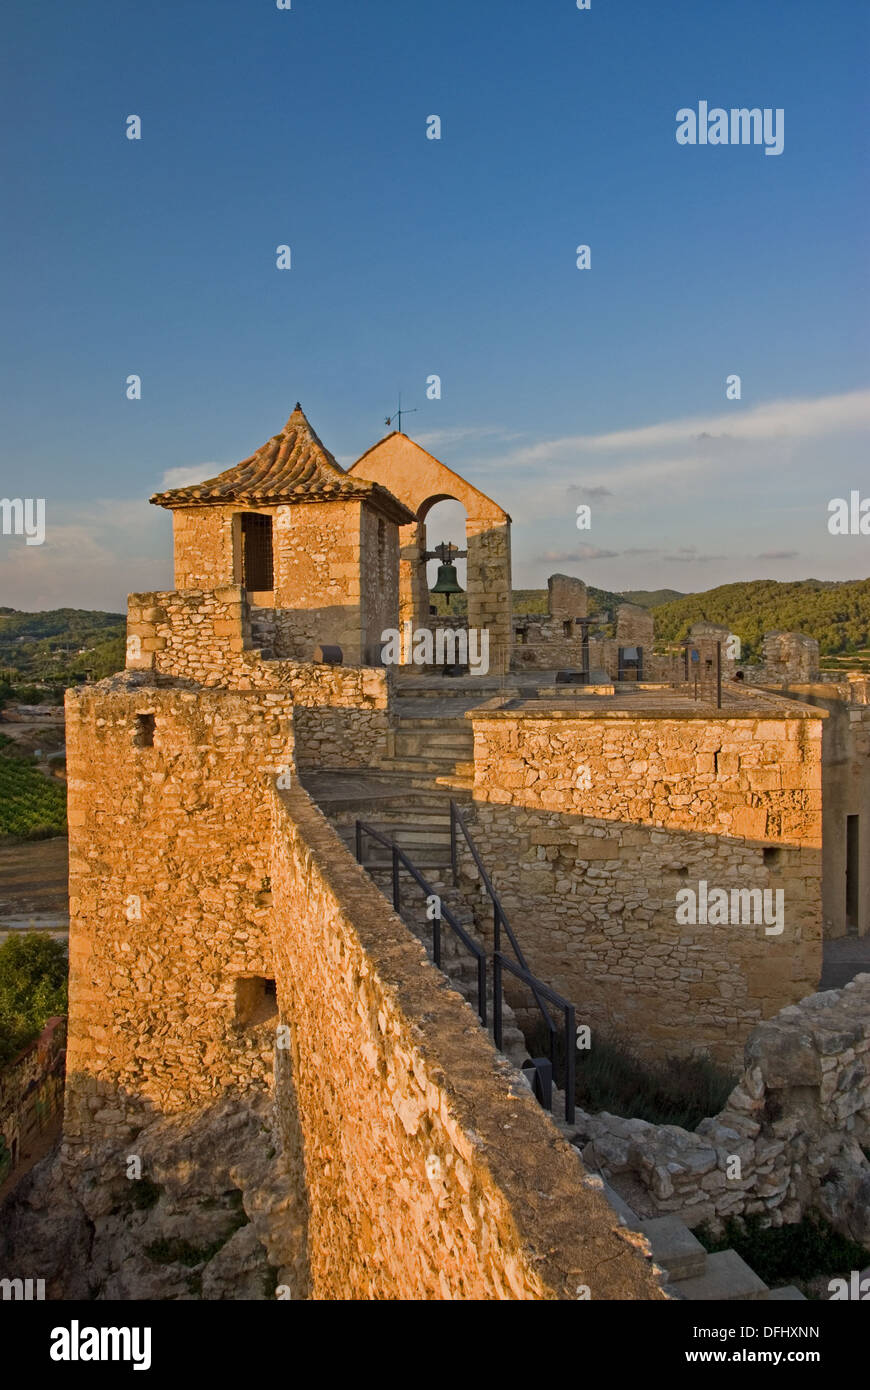 Castle of Santa Creu, in the Spanish town of Calafell, is bathed in warm evening sunshine. Stock Photo